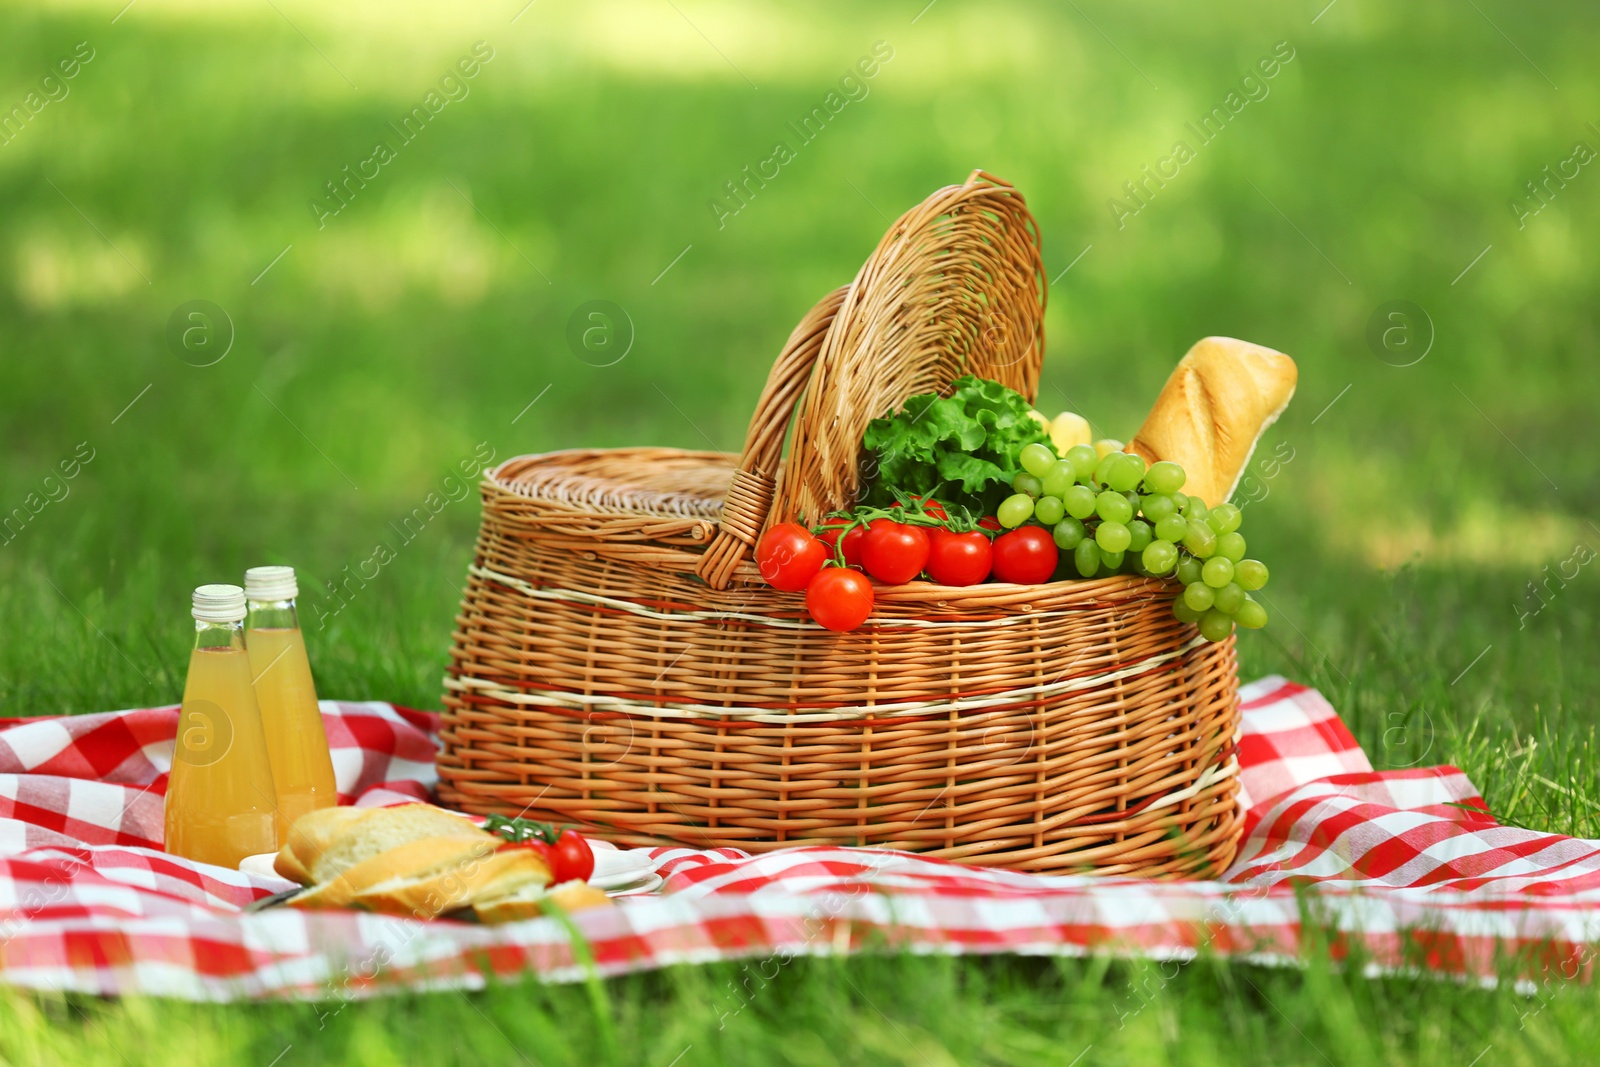 Photo of Wicker basket with food and juice on blanket in park. Summer picnic